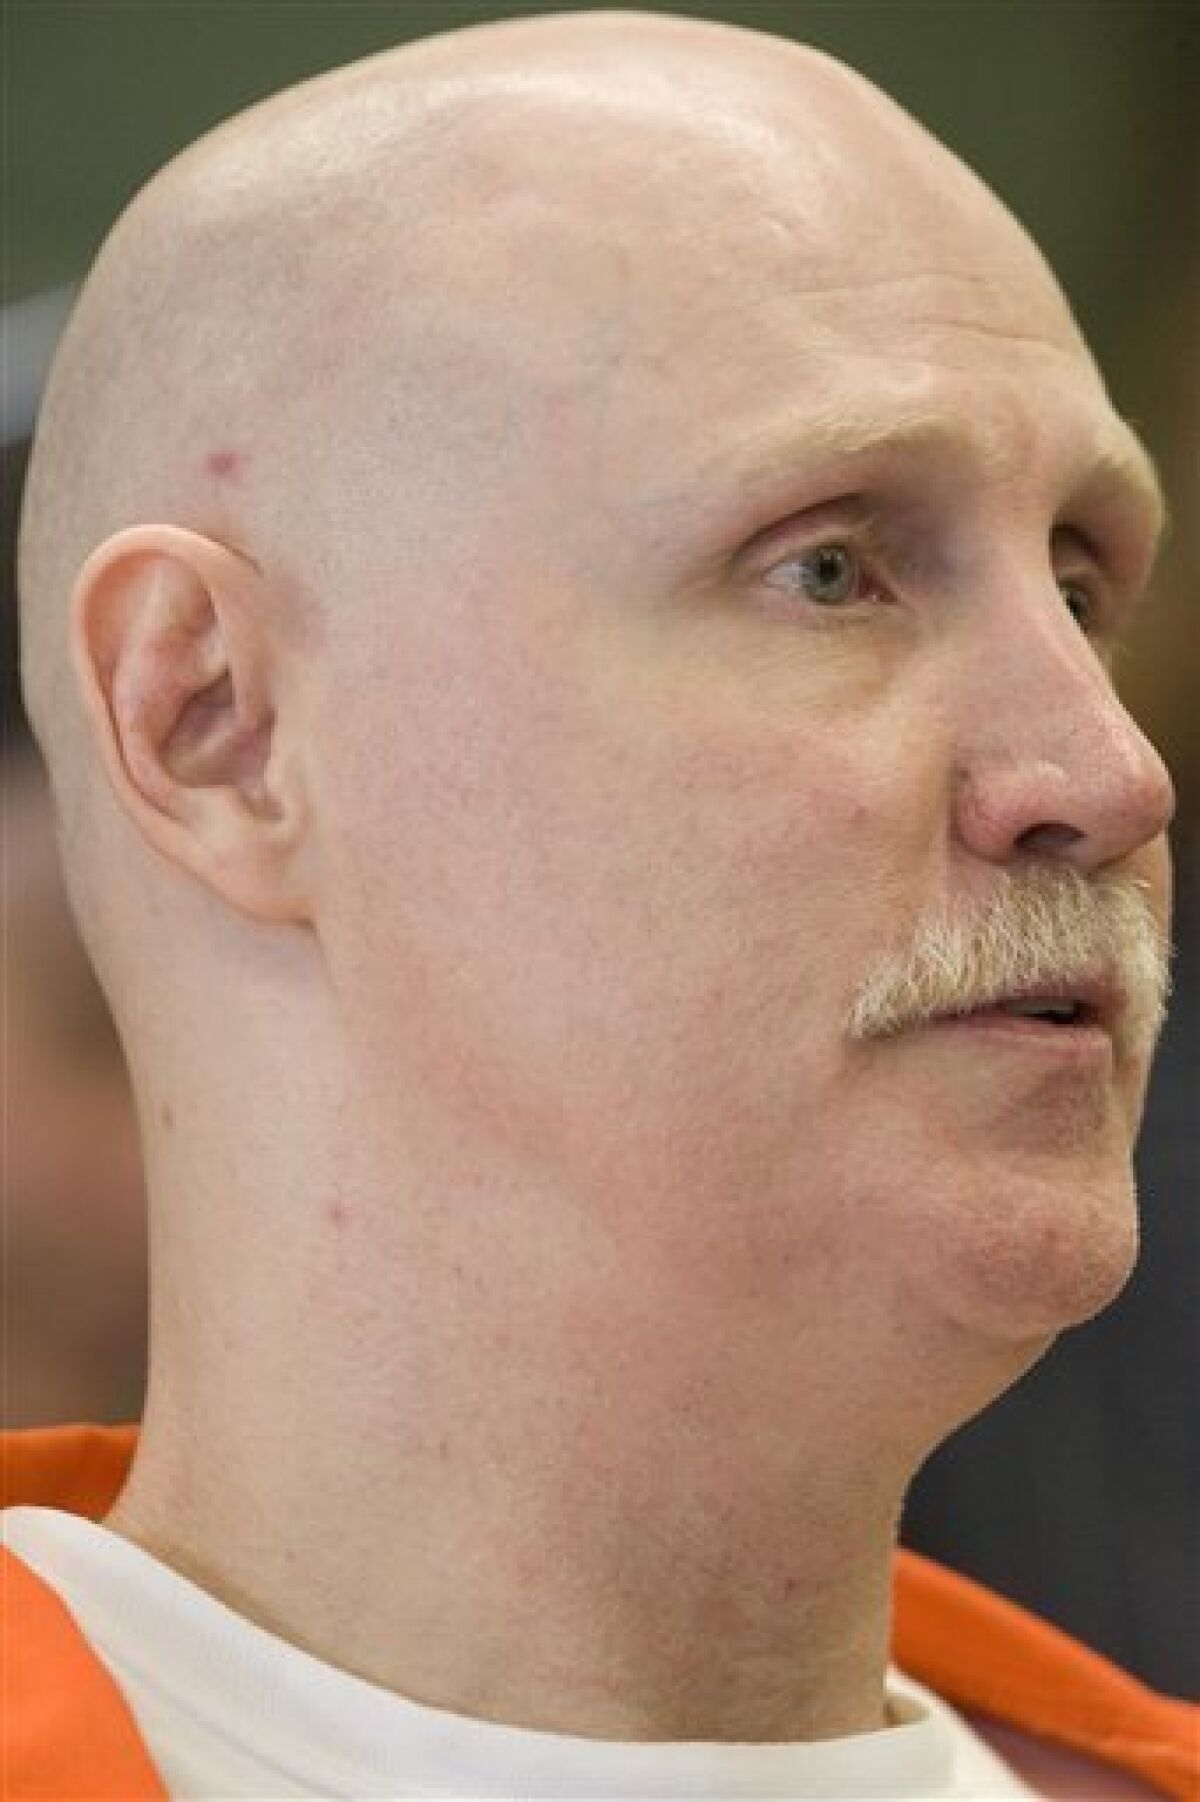 Utah to execute condemned killer by firing squad - The San Diego  Union-Tribune